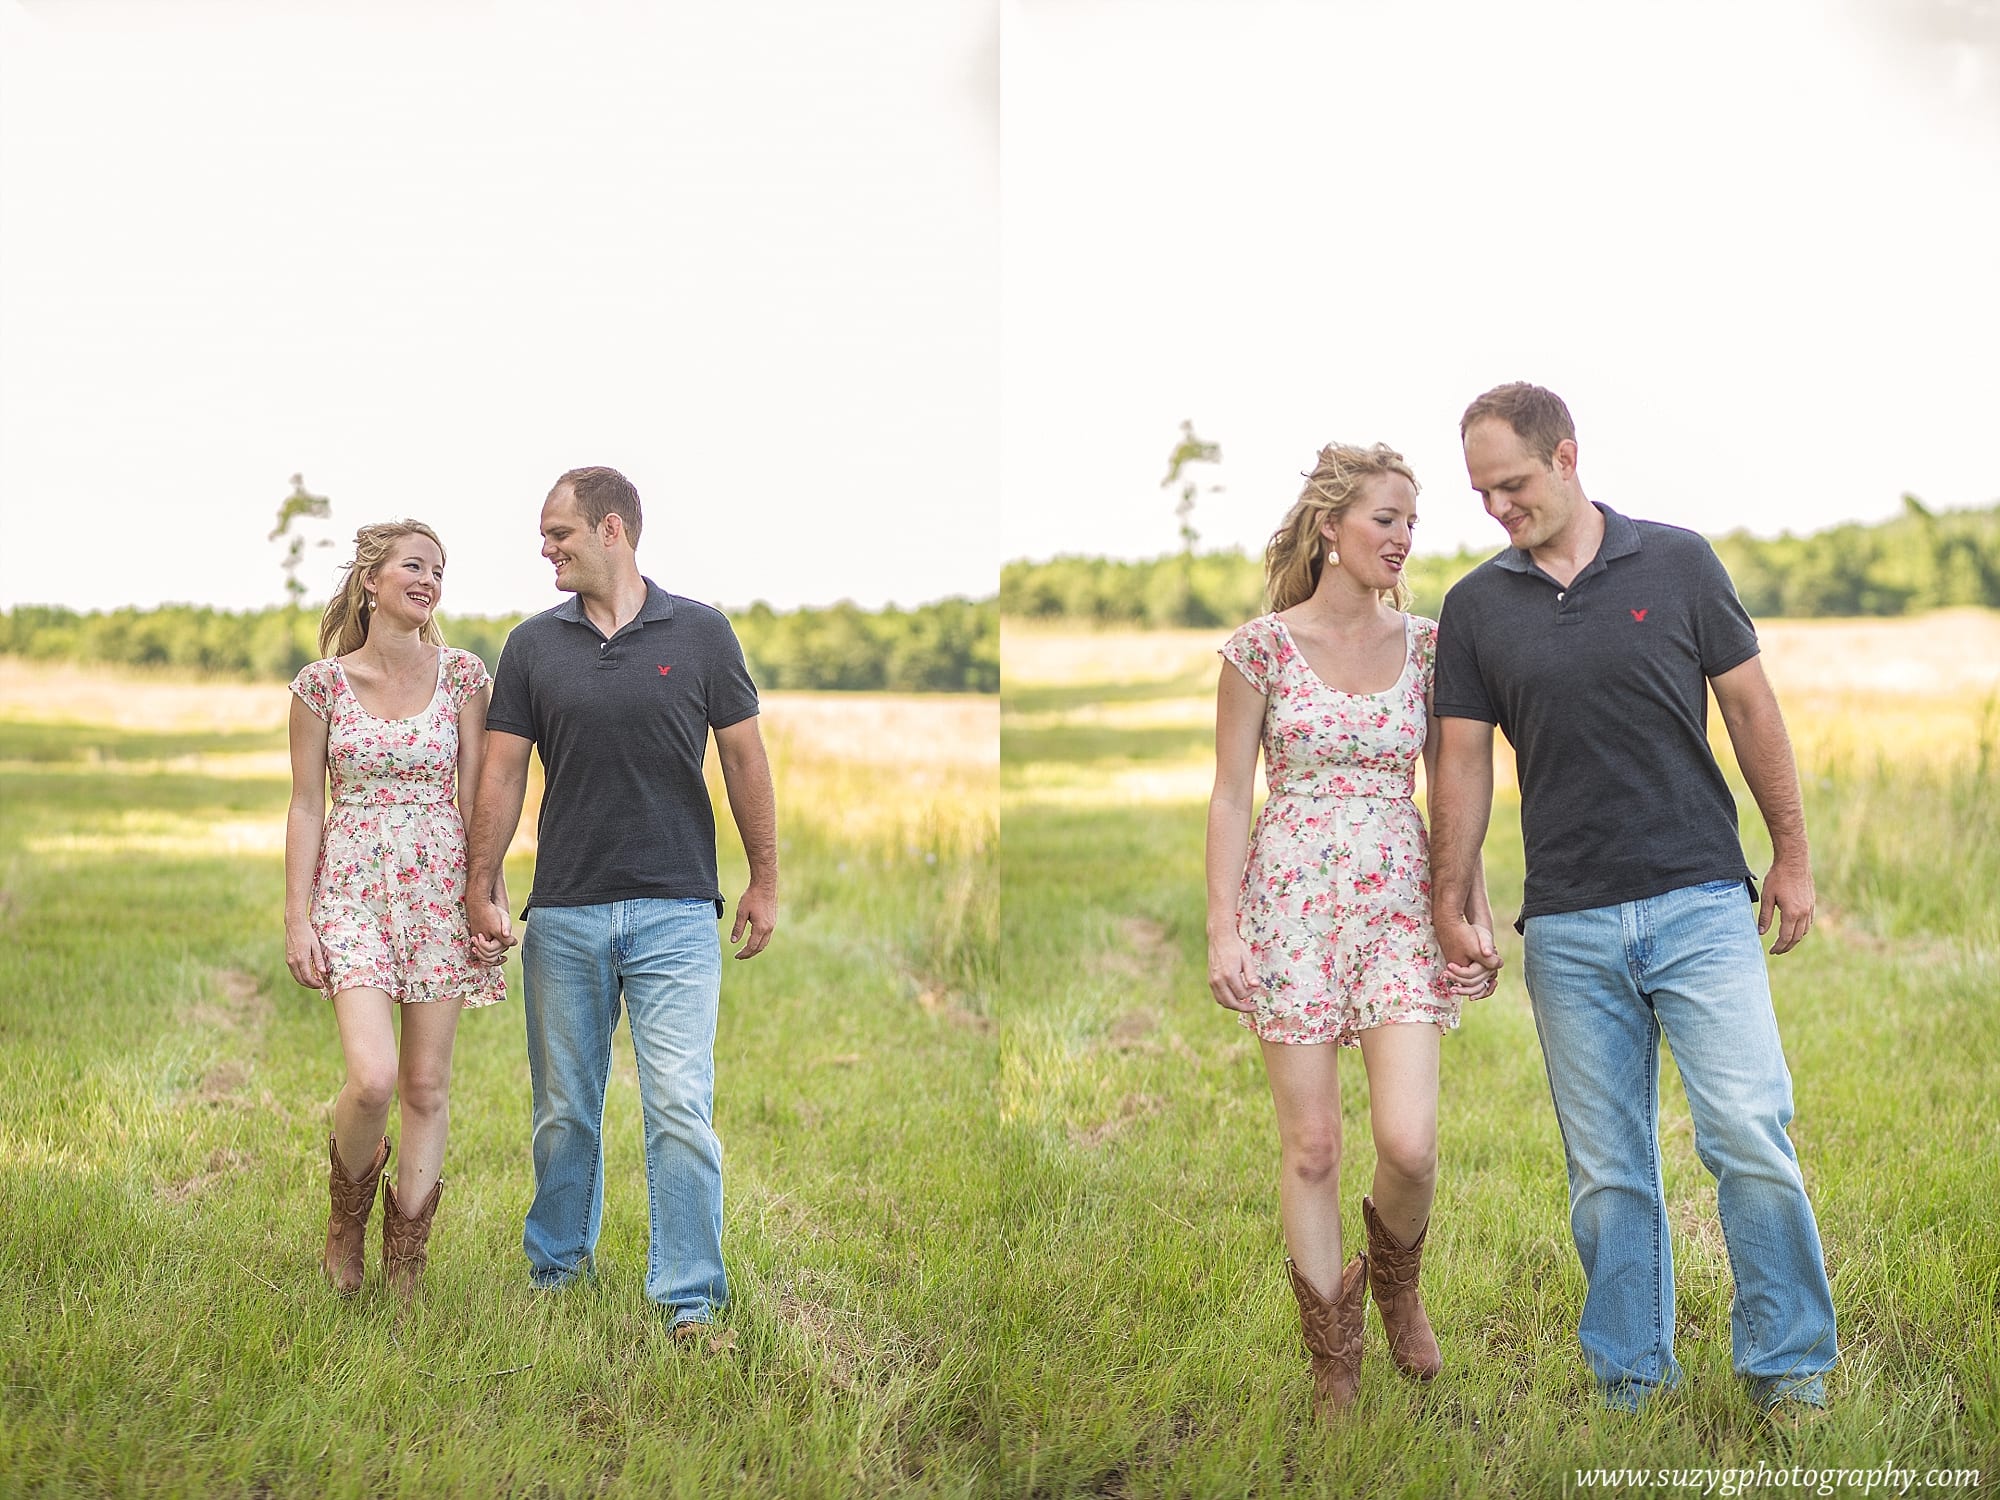 engagements-new orleans-texas-baton rouge-lake charles-suzy g-photography-suzygphotography_0016